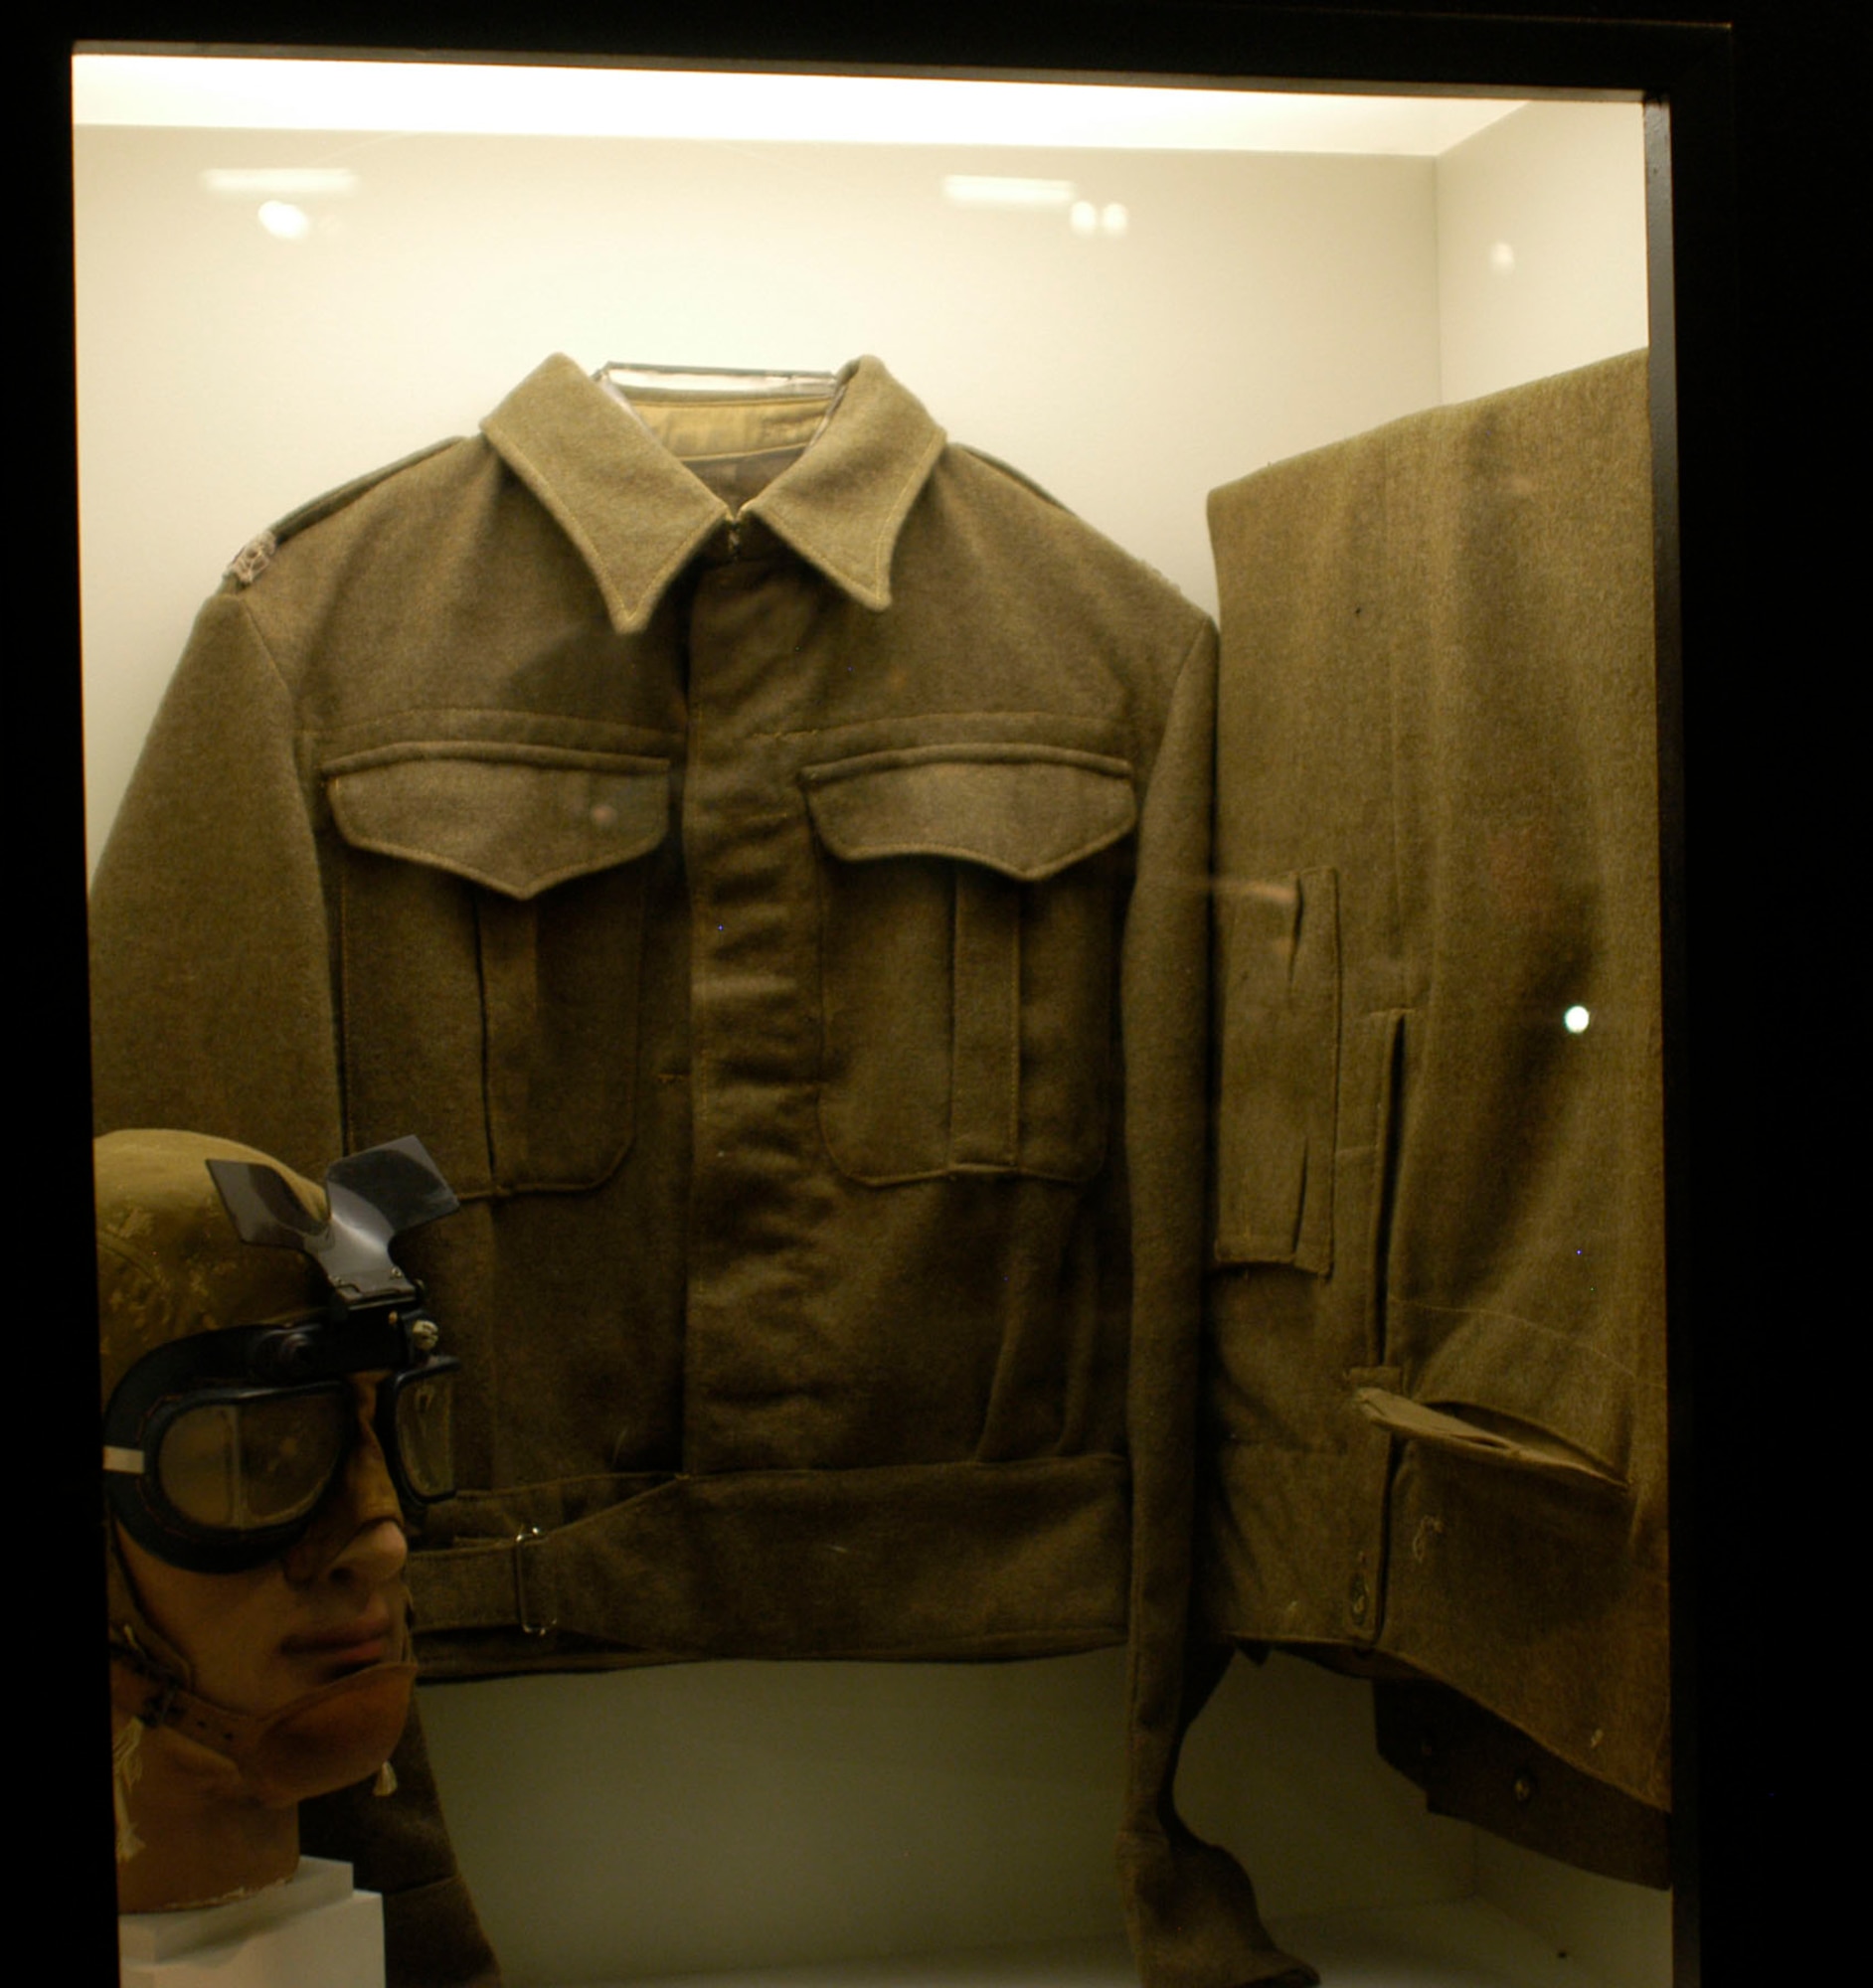 DAYTON, Ohio -- British battle dress and goggles and U.S. flying helmet worn by the donor, Col. Maurice Elstun, on combat missions in North Africa in 1942-1943. When his 93rd Bomb Group was sent from England to Northwest Africa, it was scheduled for only a 10-day period, so most men of the 93rd took few clothes with them. However, the 93rd was soon sent to a base near Torbuk, Libya, for permanent assignment where the only uniforms available were British. These items are on display in the World War II Gallery at the National Museum of the U.S. Air Force. (U.S. Air Force photo)